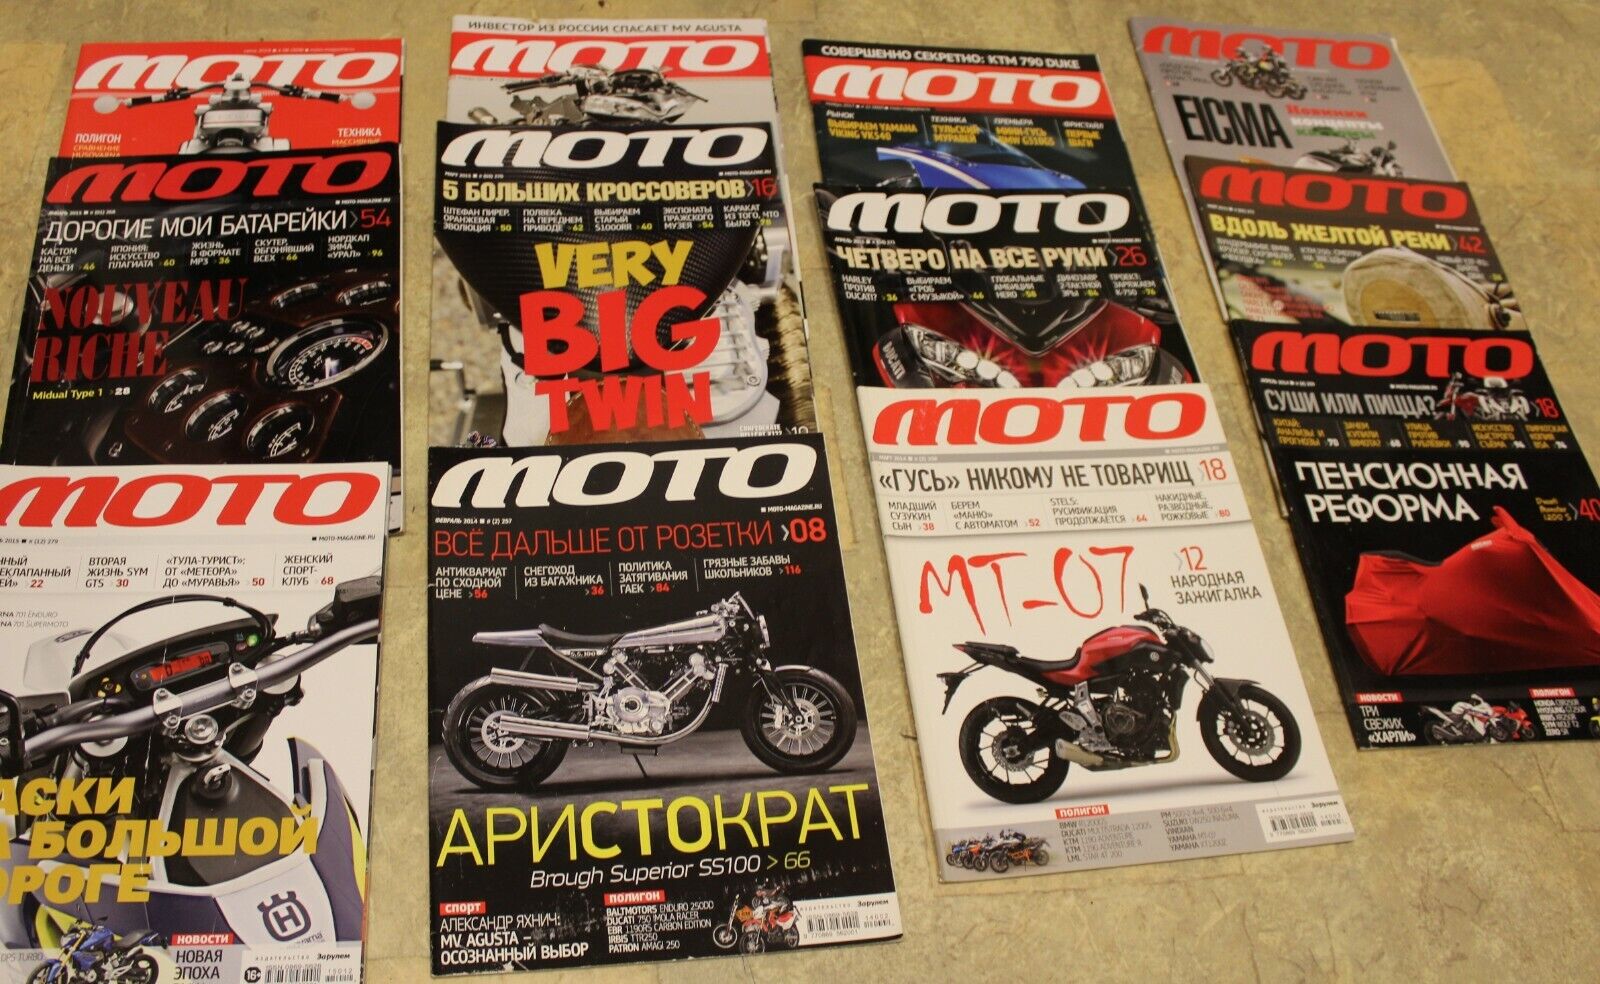 11658.Set of Russian Motocycle Magazines 51 issues 2004-2018. Moto, Moto review